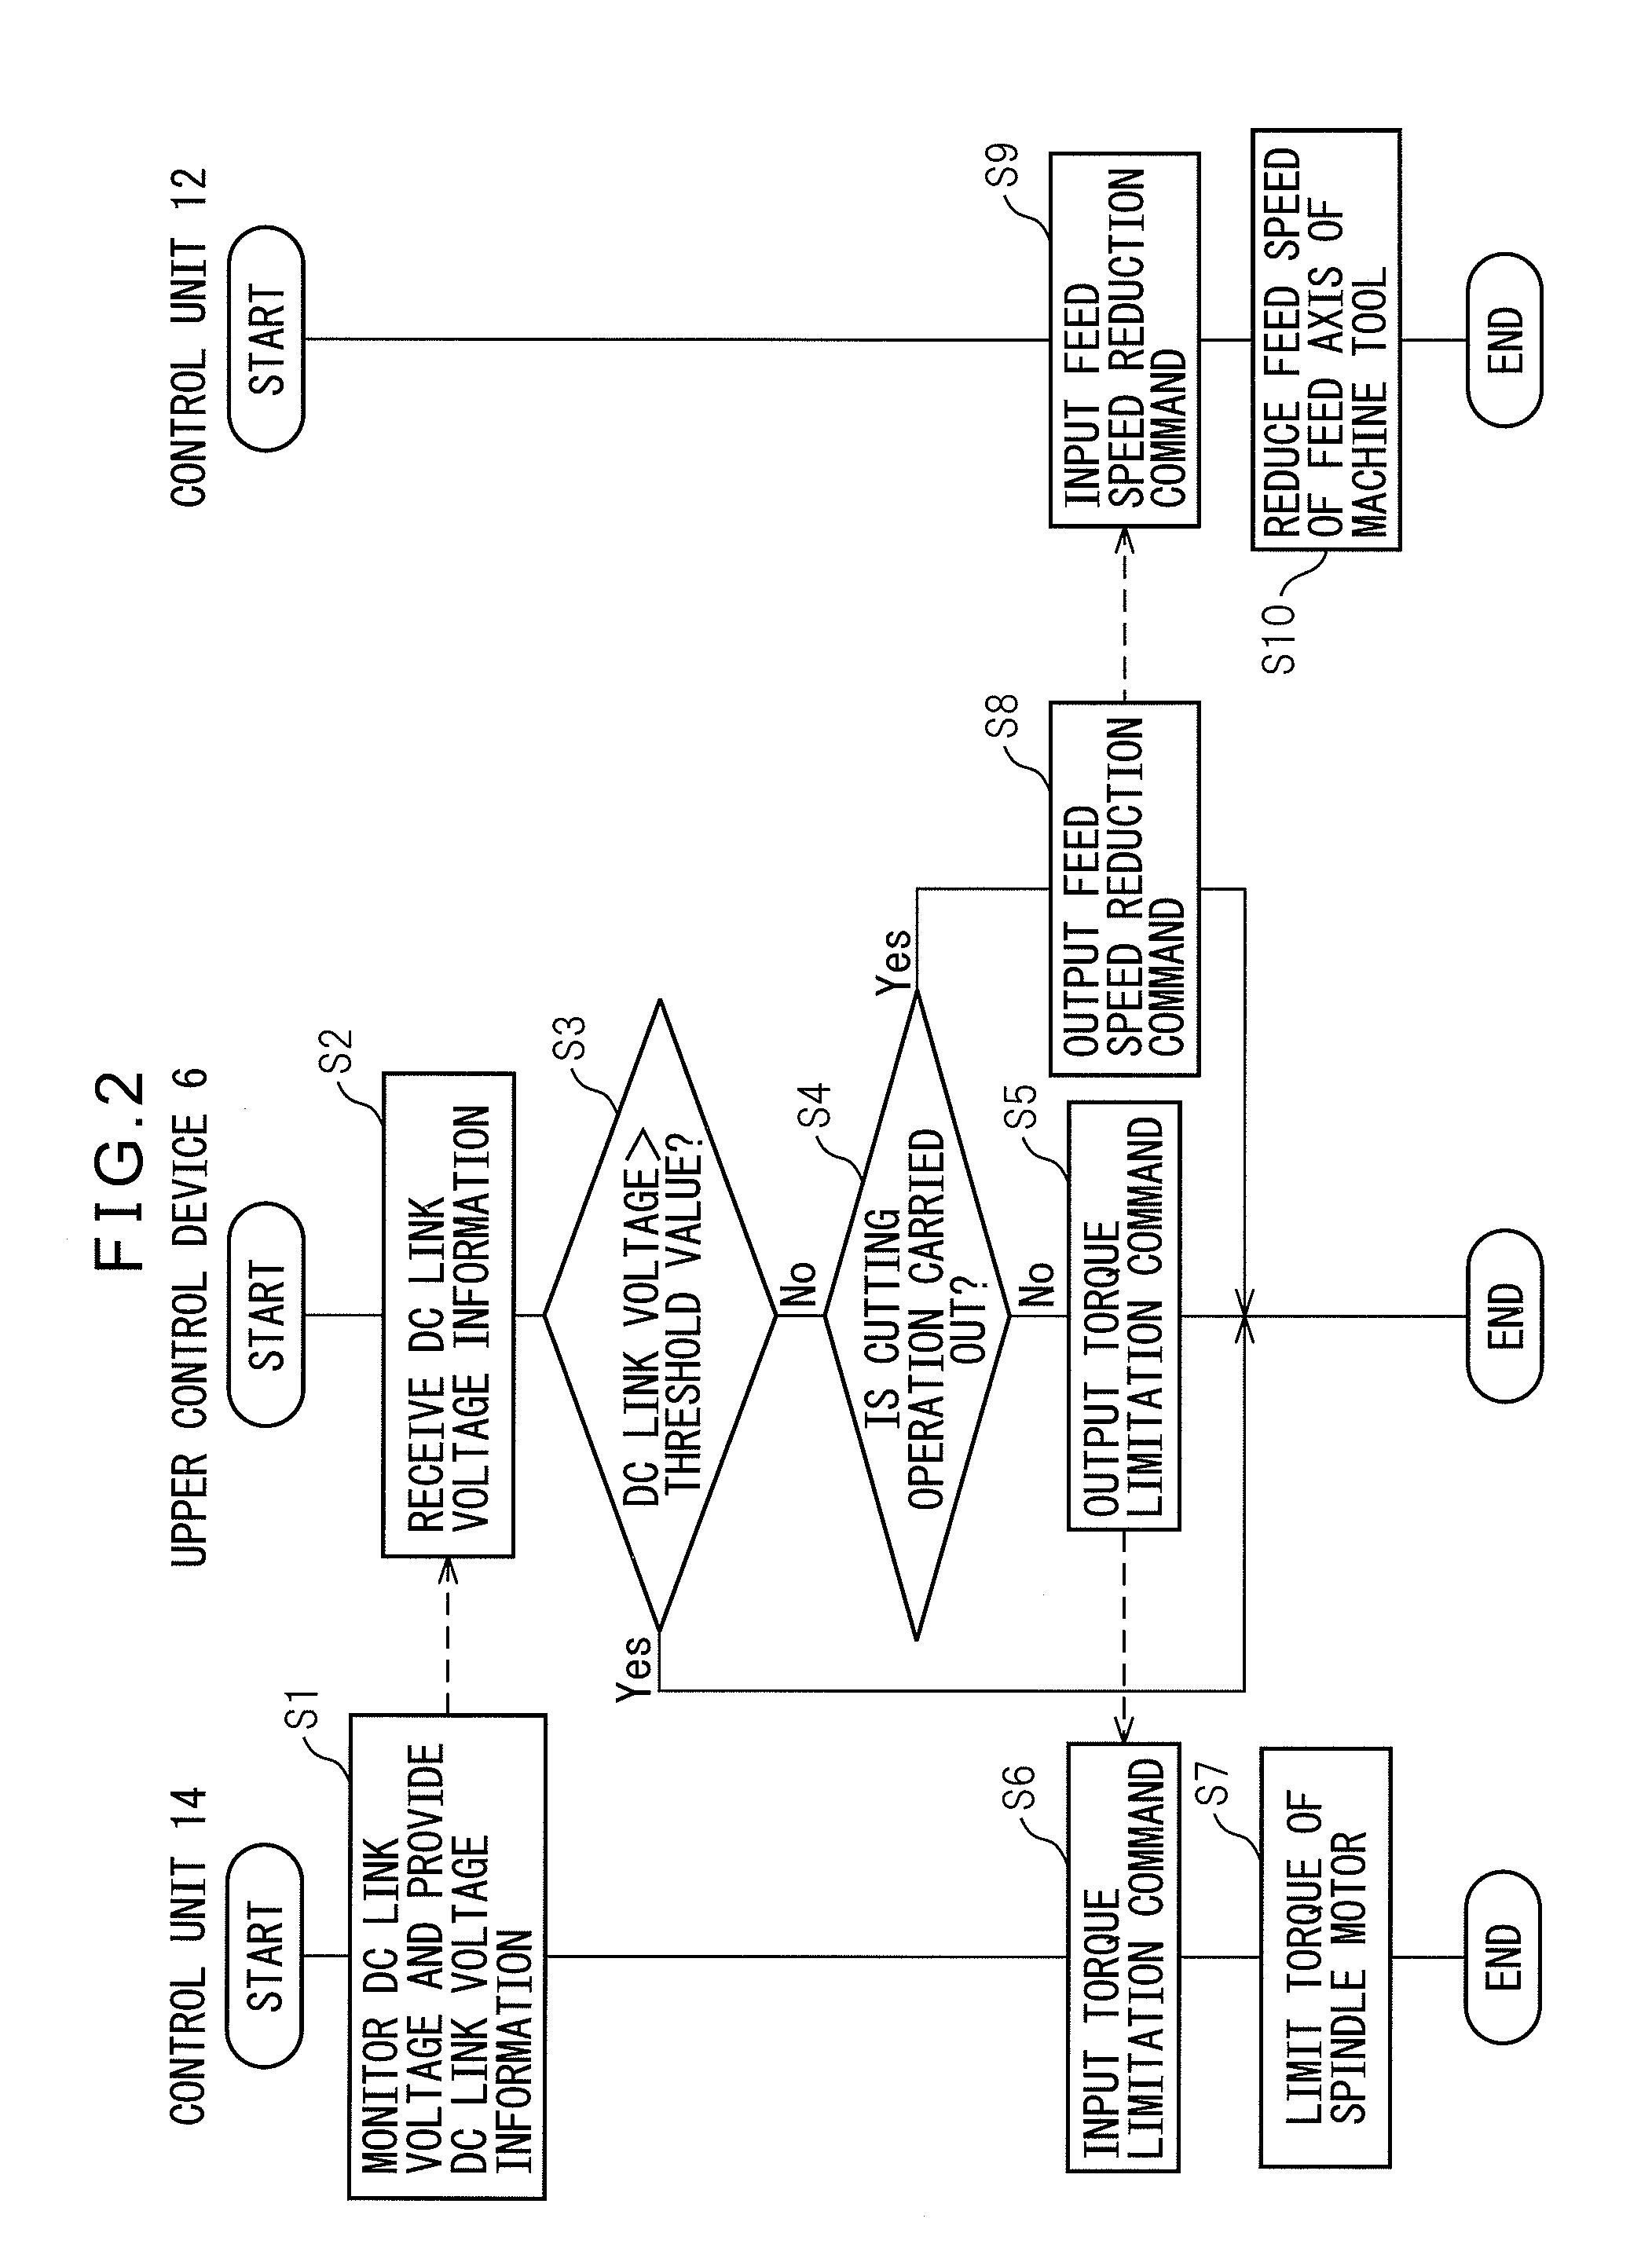 Motor drive control device for limiting output of motor